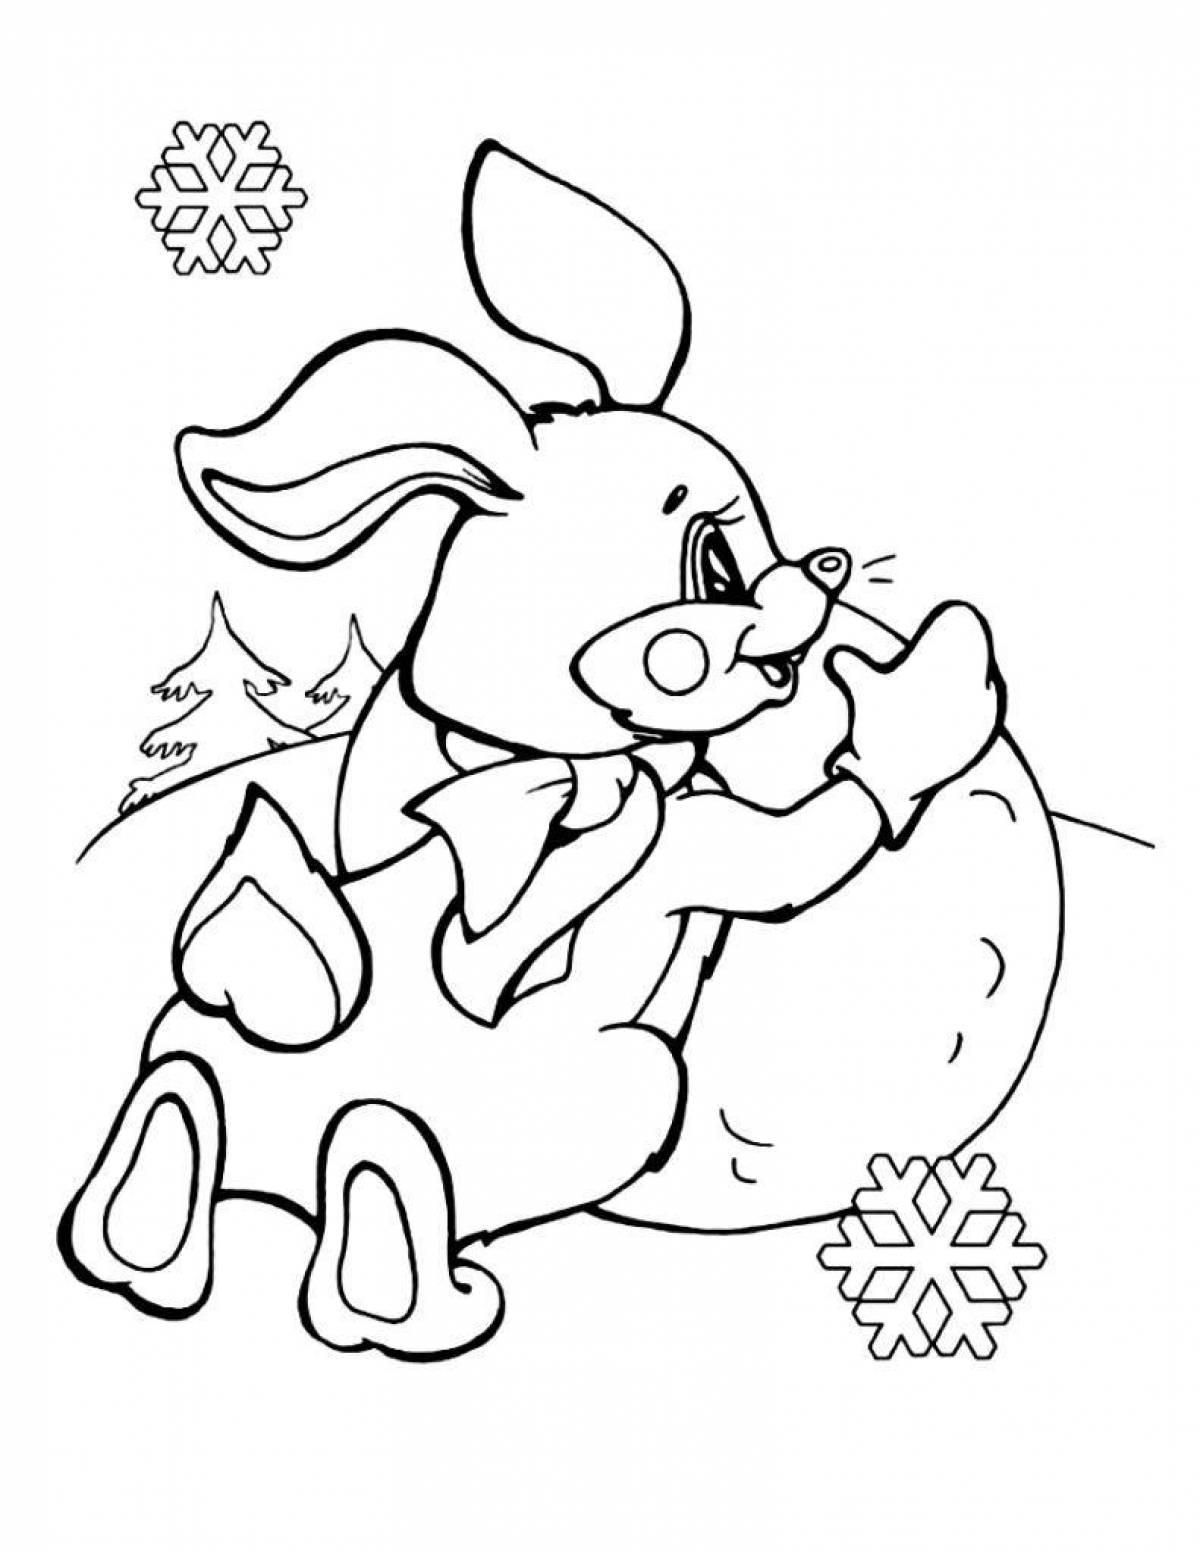 Christmas drawing of an enthusiastic hare